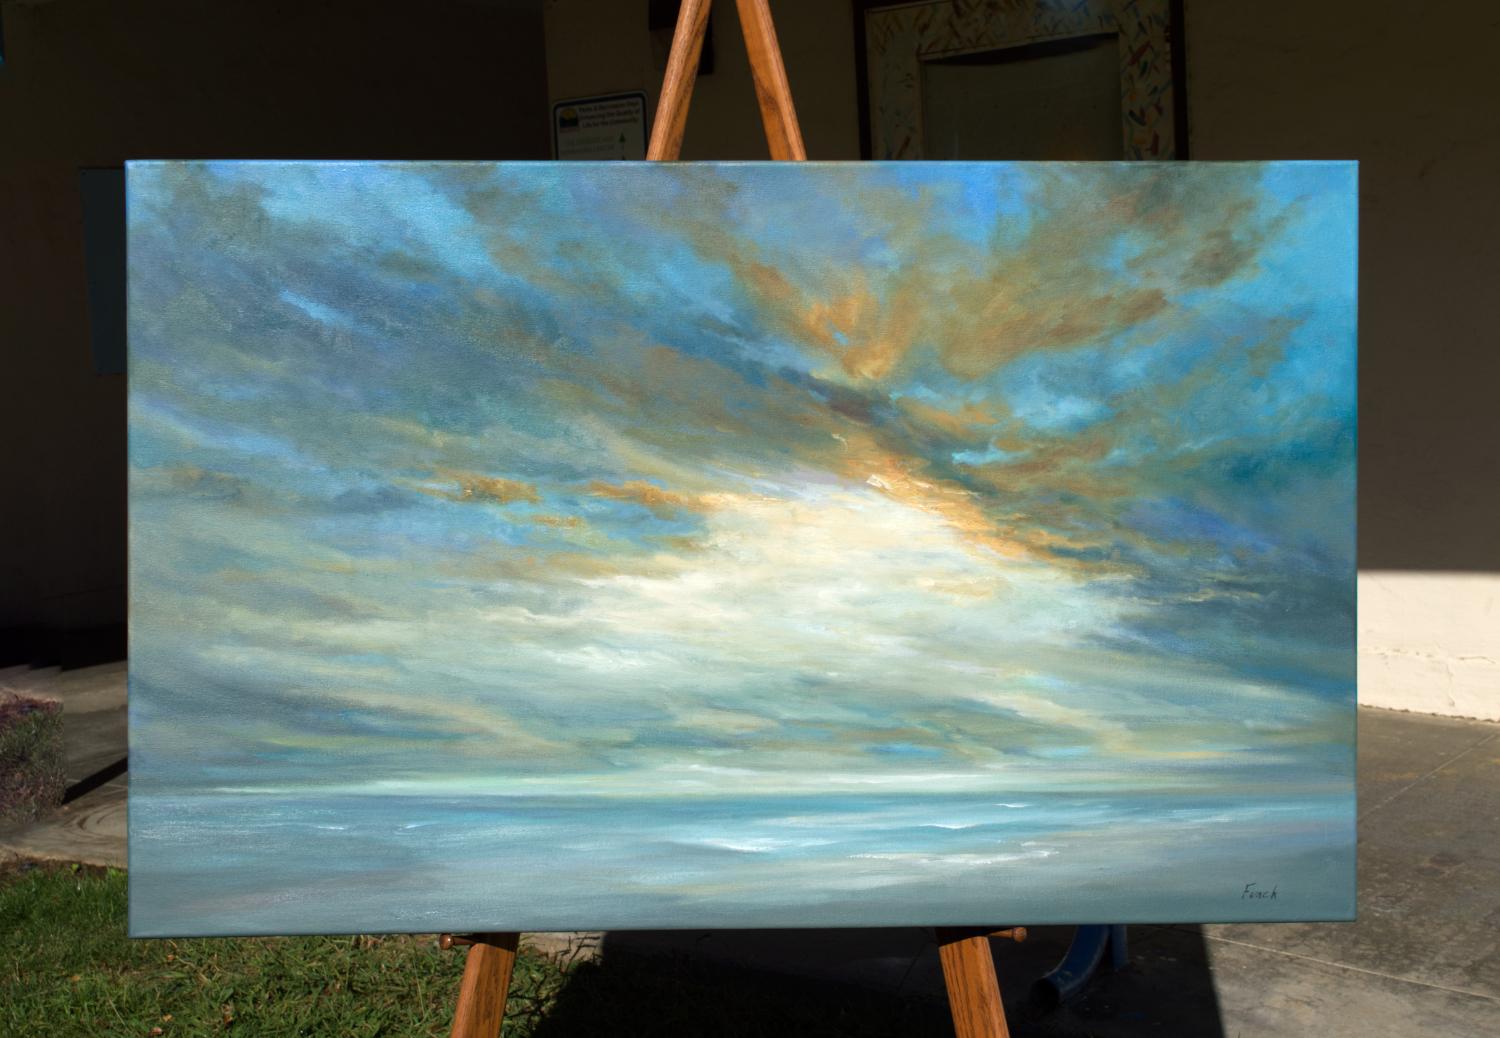 <p>Artist Comments<br />Using her signature style of highly nuanced colors and dramatic values, artist Sheila Finch captures a fleeting moment of sunlight dancing beyond the October coastal clouds above the Pacific Ocean. Teal, blue, gold, yellow,